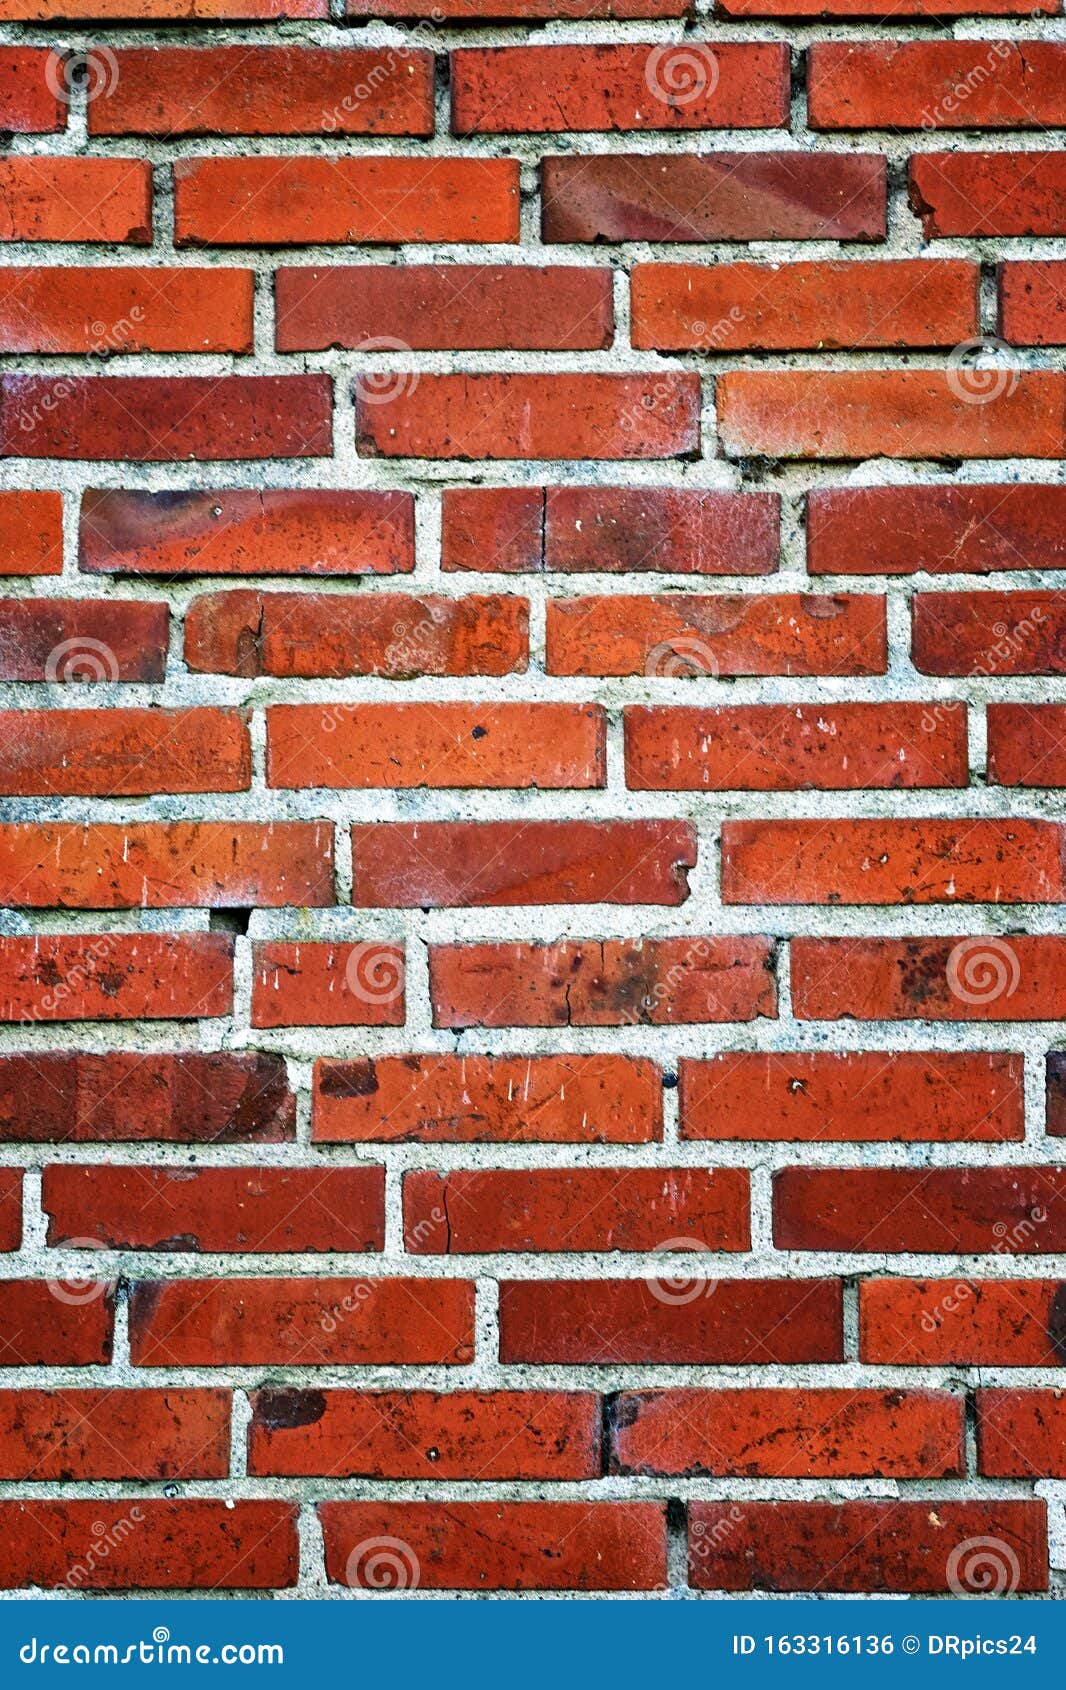 Brick Wall Background Vertical with Holes Stock Photo - Image of background,  brick: 163316136